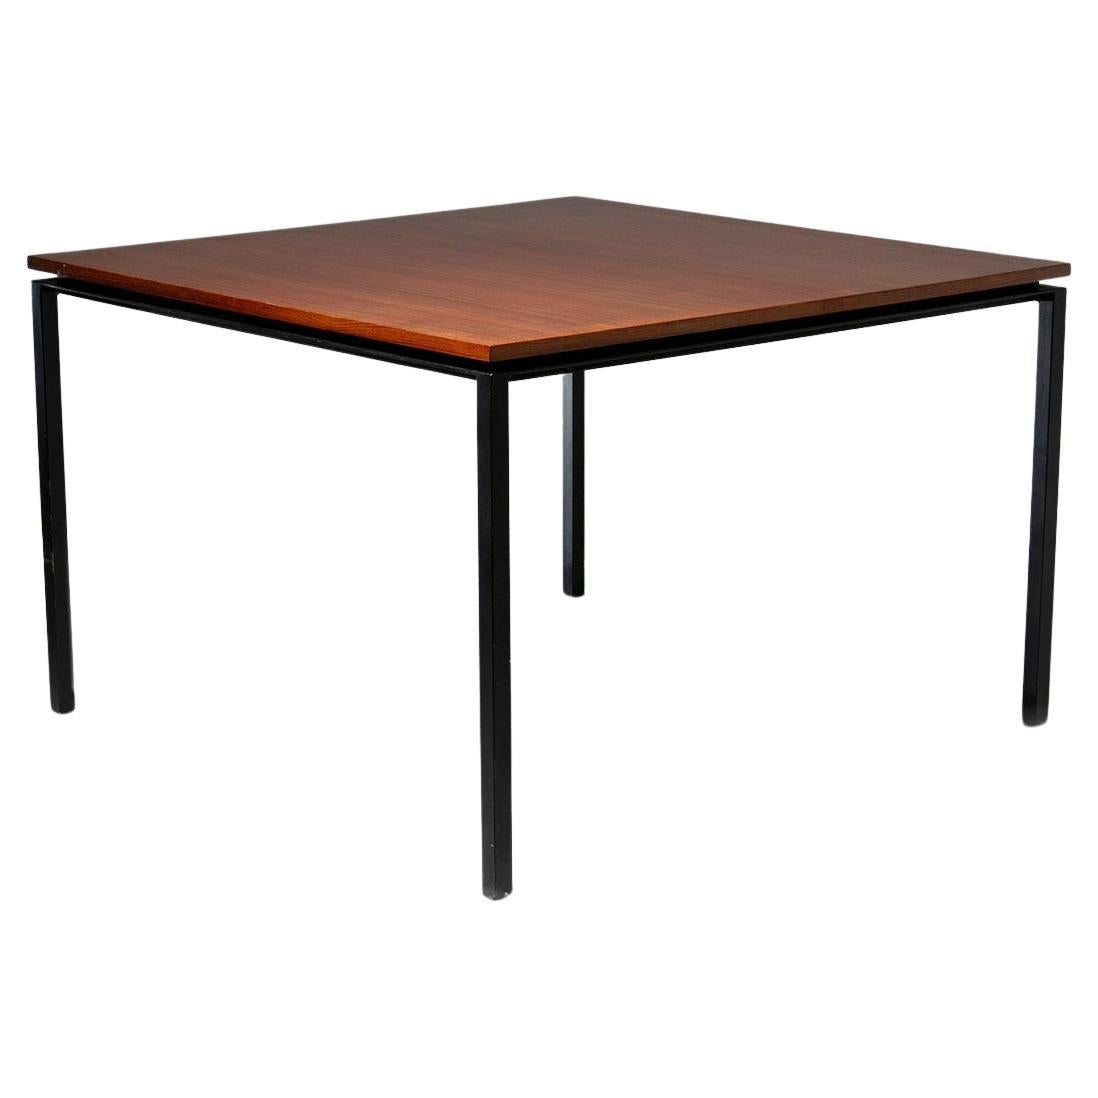 Wood Squared Dining Table by Paolo Tilche for Arform, Italy, 1950s For Sale